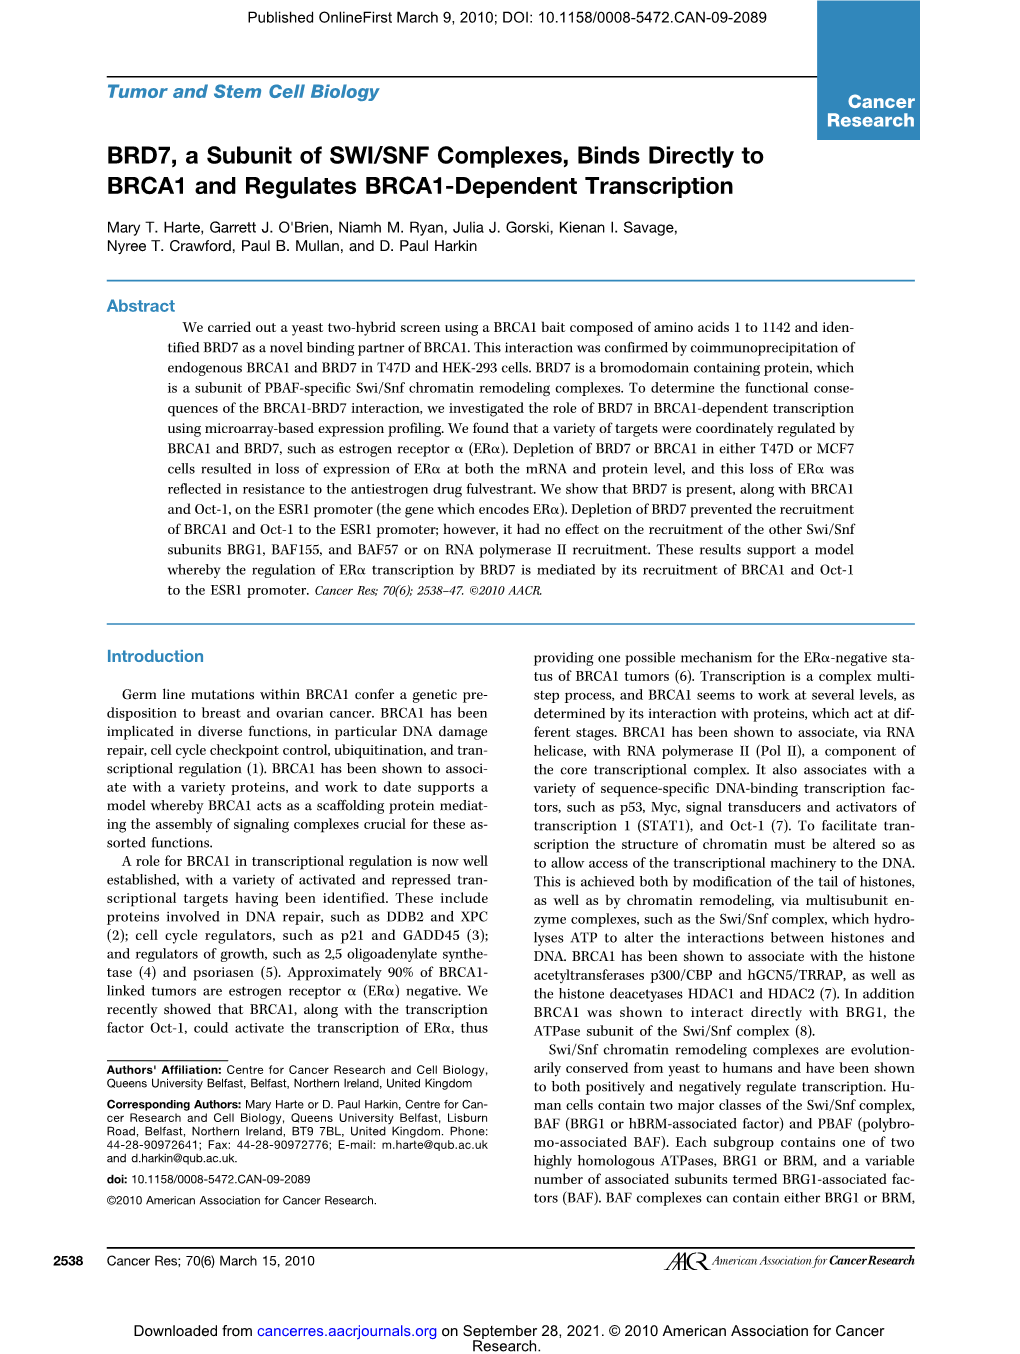 BRD7, a Subunit of SWI/SNF Complexes, Binds Directly to BRCA1 and Regulates BRCA1-Dependent Transcription